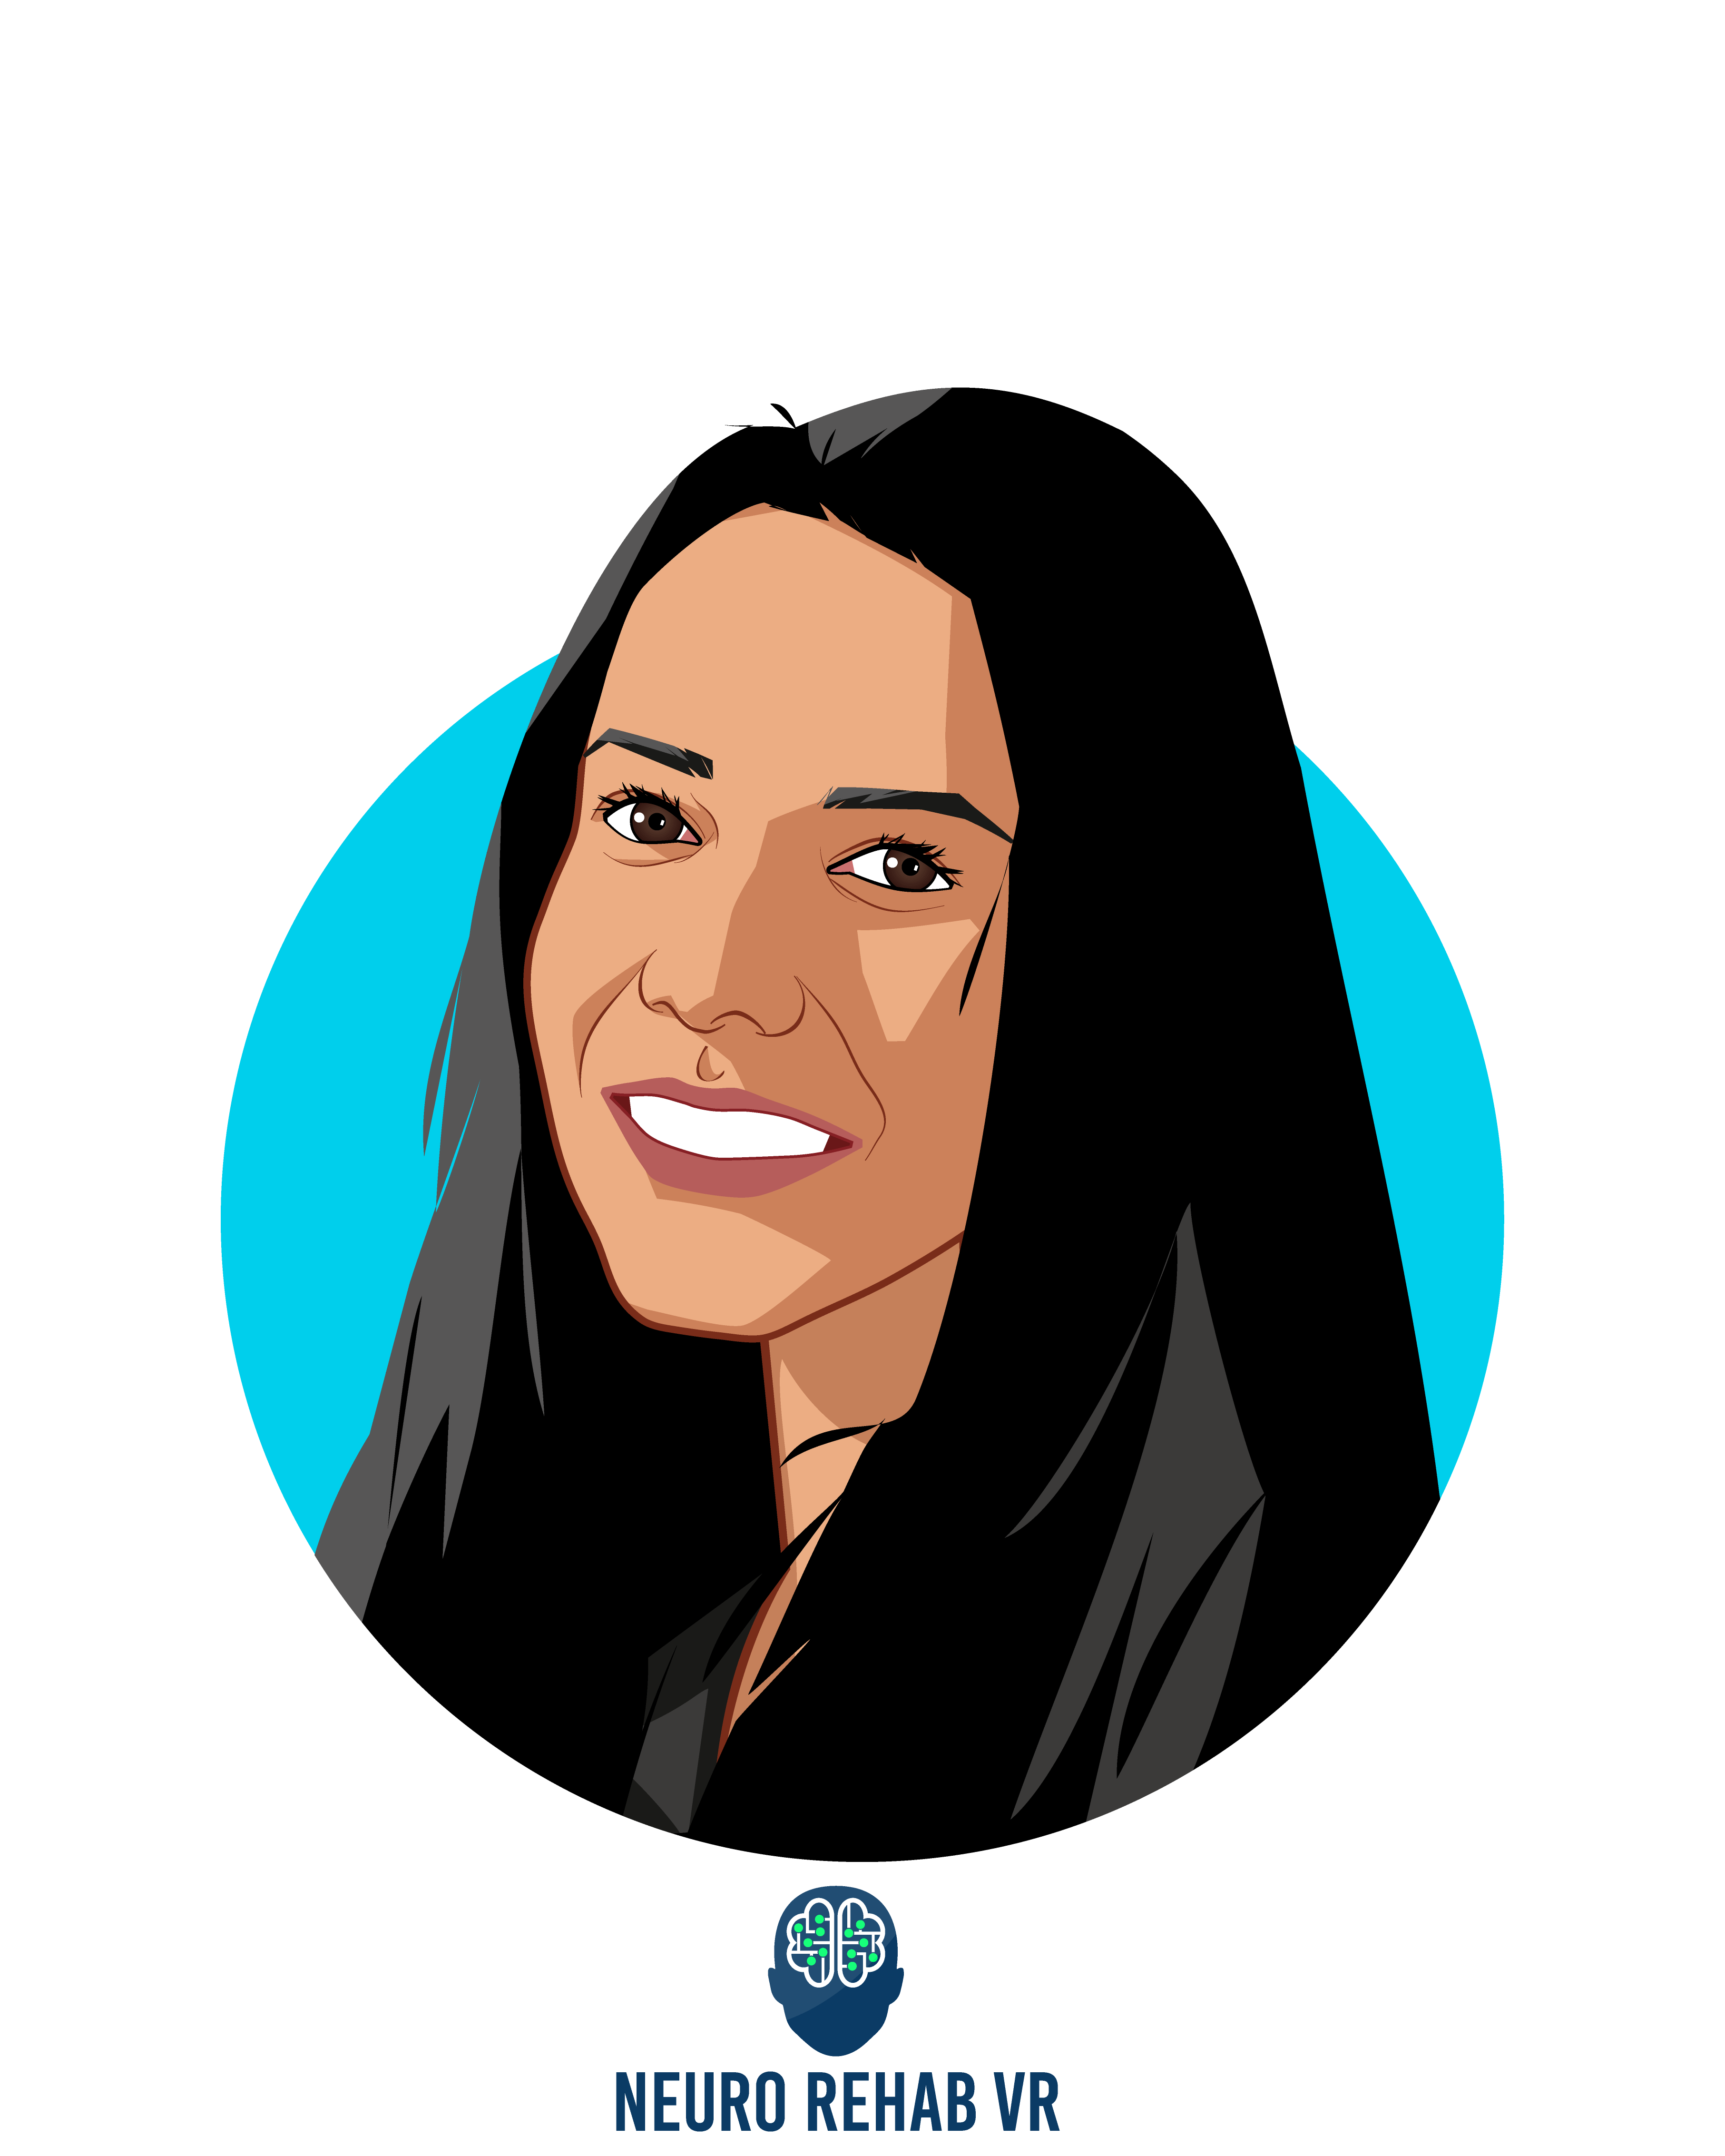 Main caricature of Veena Somareddy, who is speaking at HLTH and is Co-founder & CTO at Neuro Rehab VR